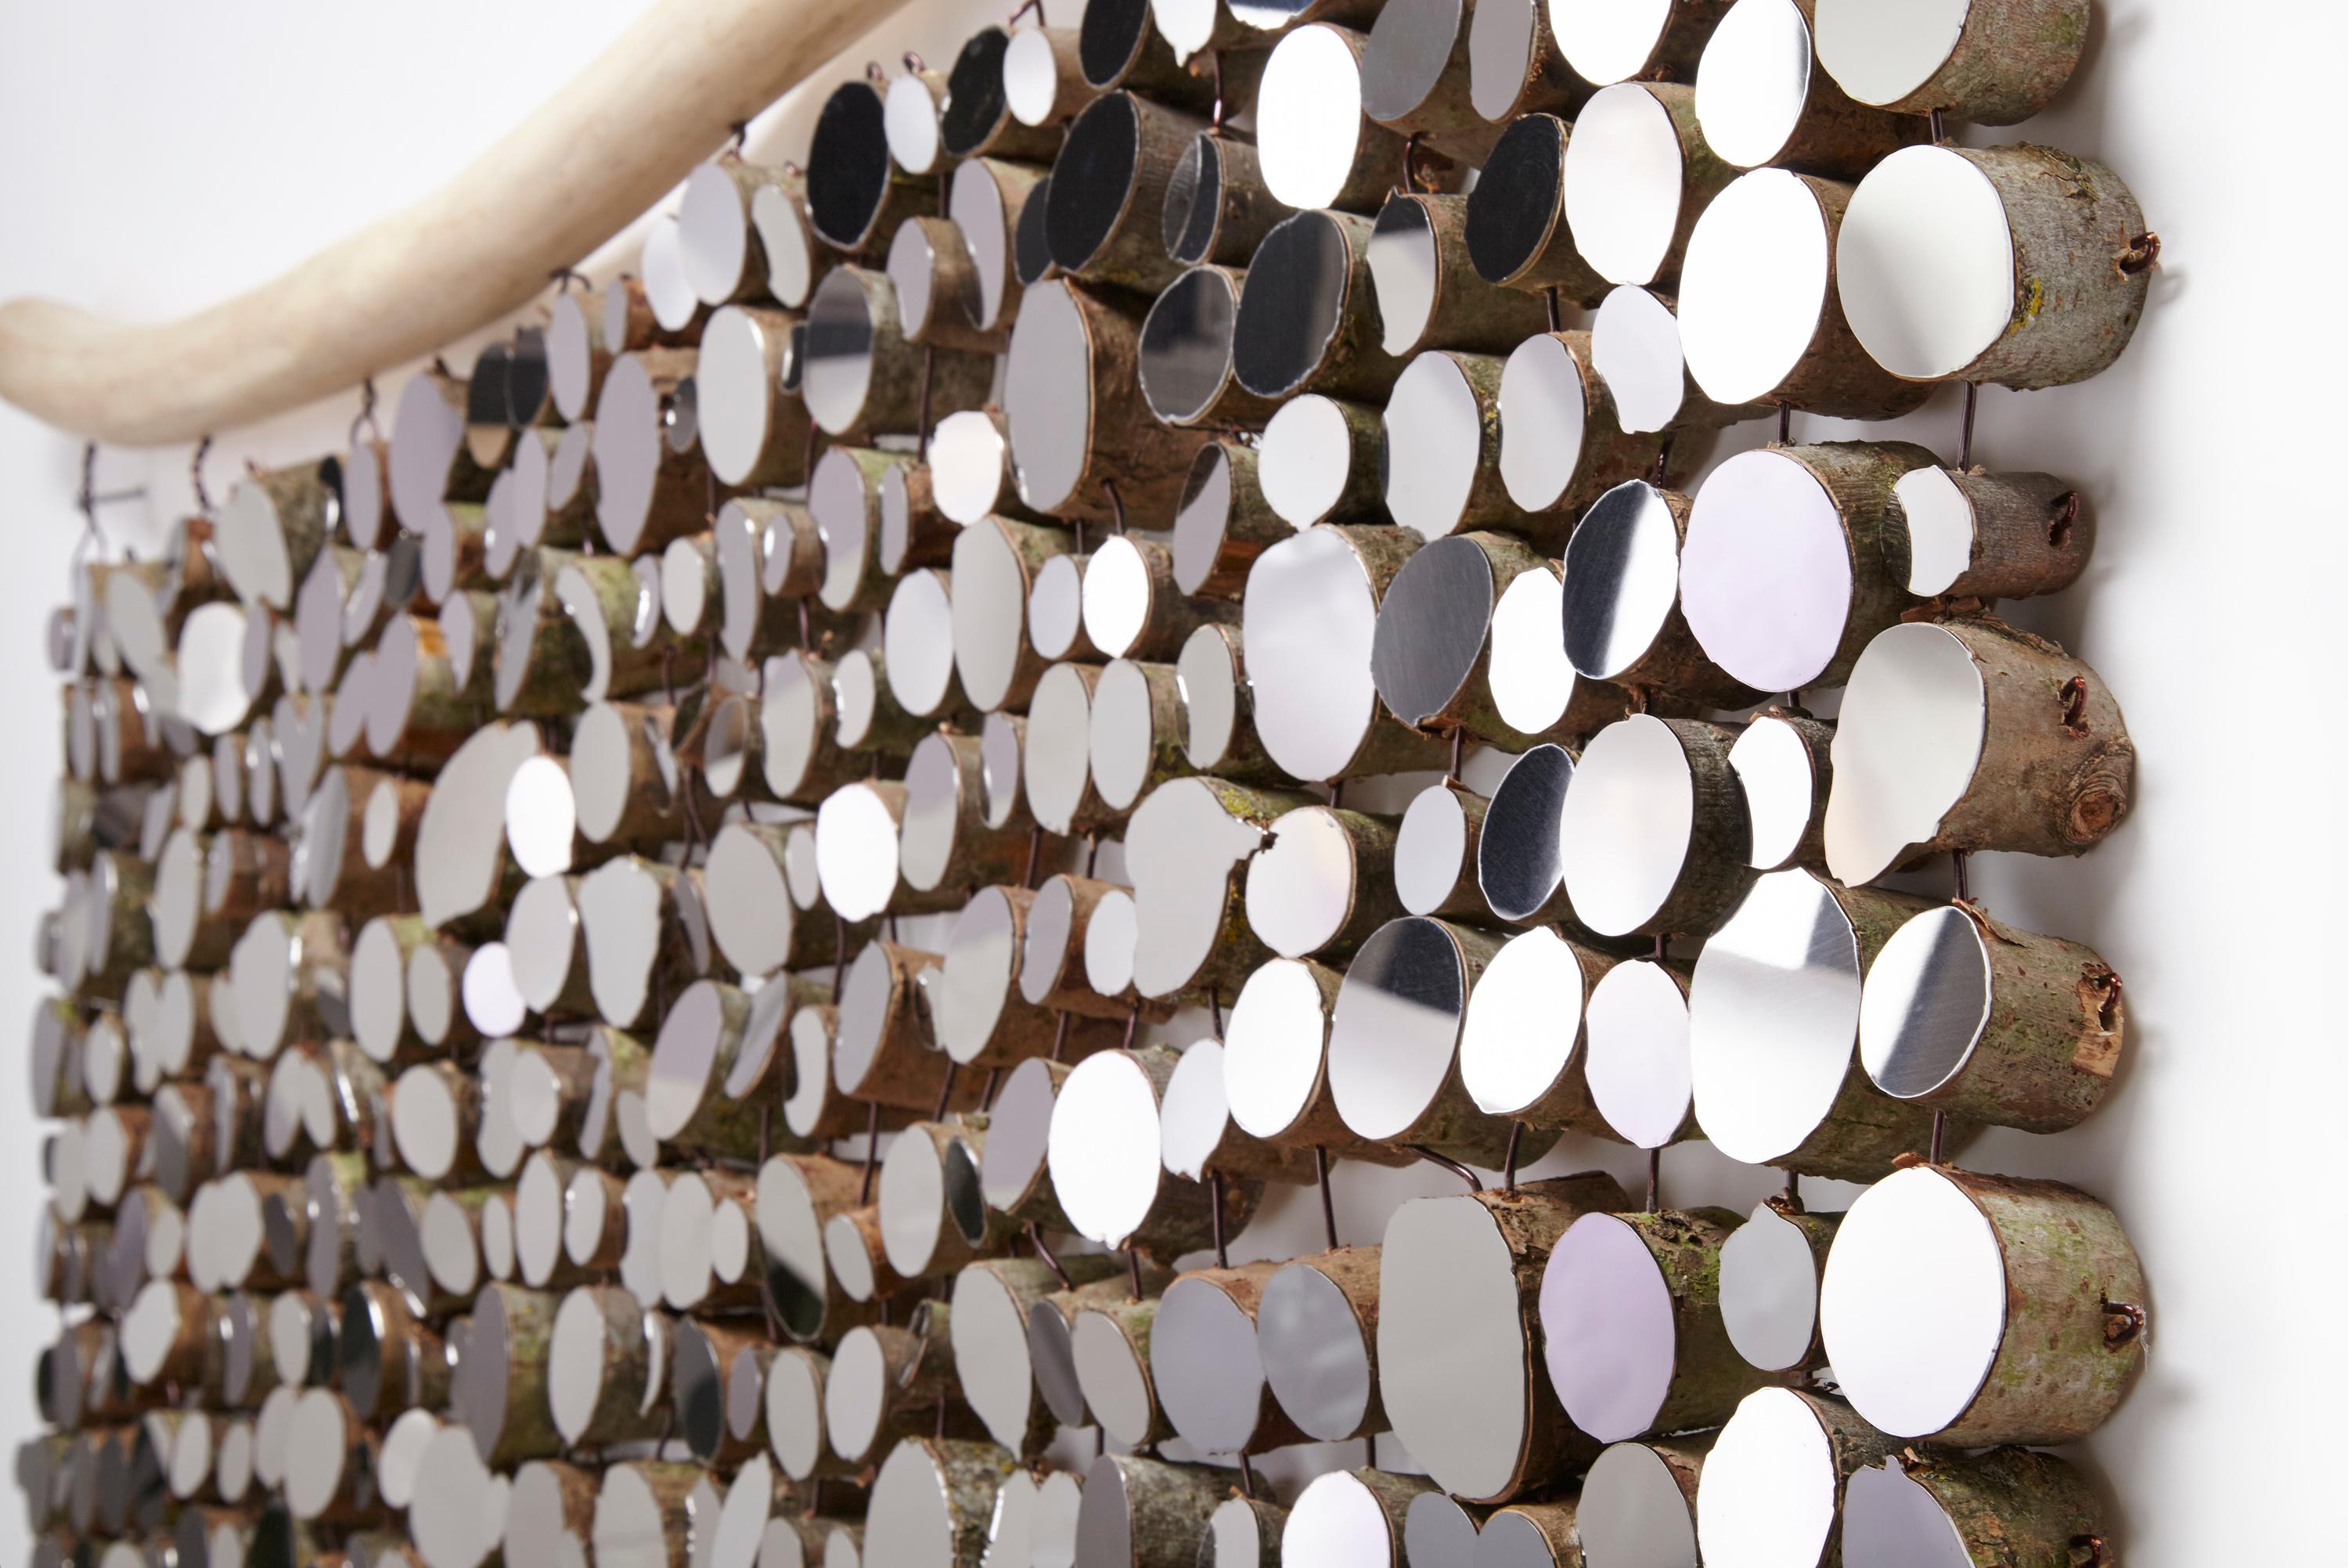 Landscape Mirror Tapestry: A Sculptural Wall Hanging of Mirrors and Fallen Wood - Contemporary Sculpture by Lee Borthwick